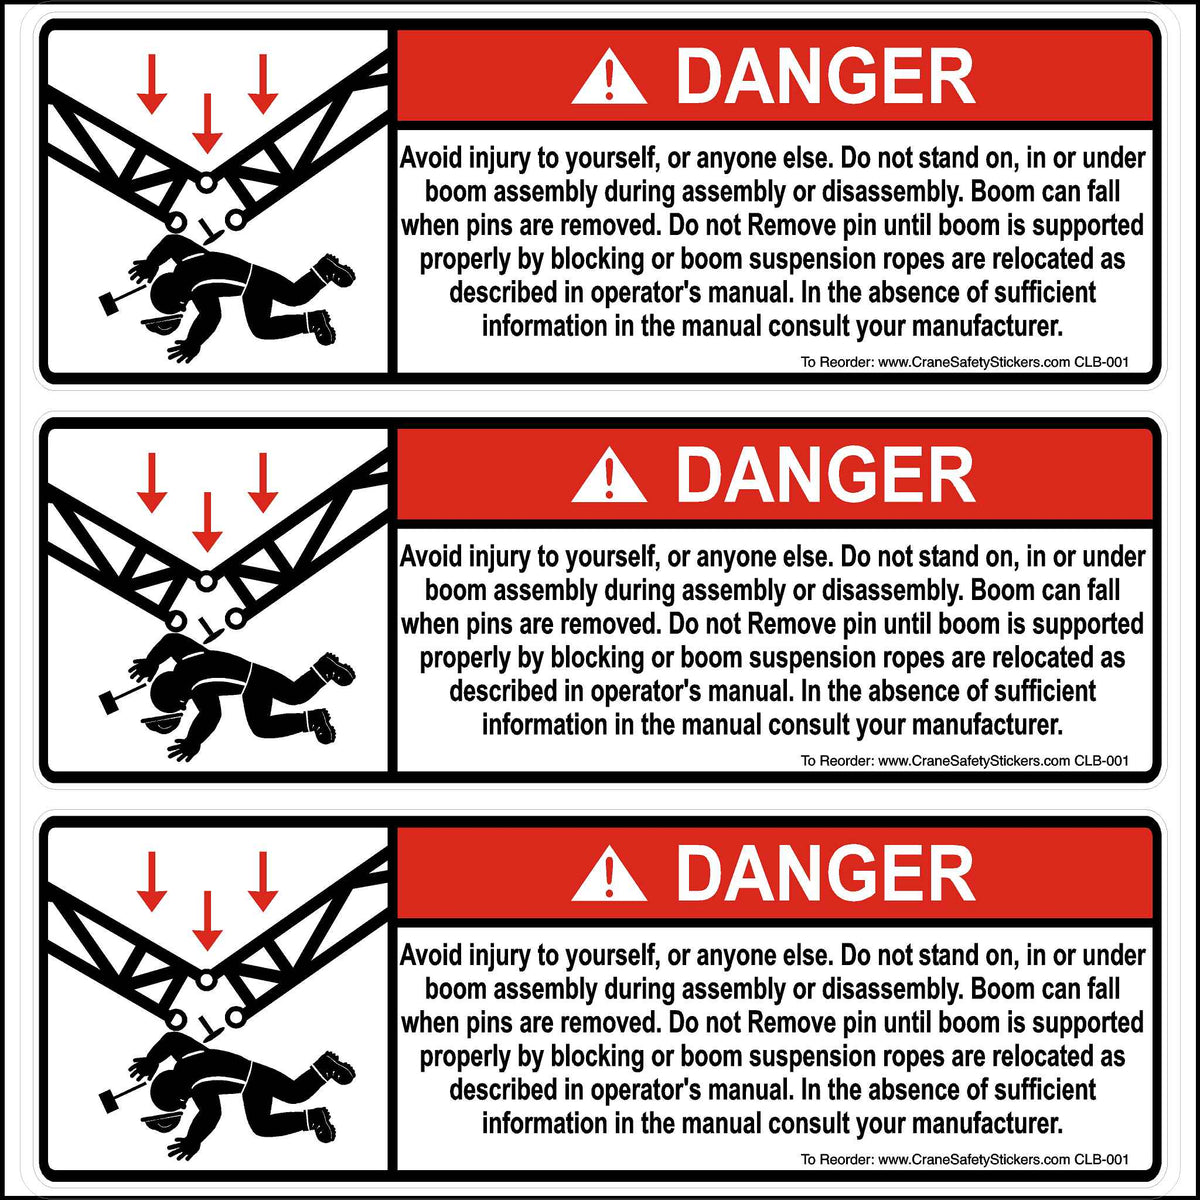 3x9 Inch 3 Pack of Lattice Boom Safety Sticker Printed With, DANGER, Avoid injury to yourself, or anyone else. Do not stand on, in or under boom assembly during assembly or disassembly. Boom can fall when pins are removed. Do not Remove pin until boom is supported properly by blocking or boom suspension ropes are relocated as described in operator&#39;s manual. In the absence of sufficient information in the manual consult your manufacturer.